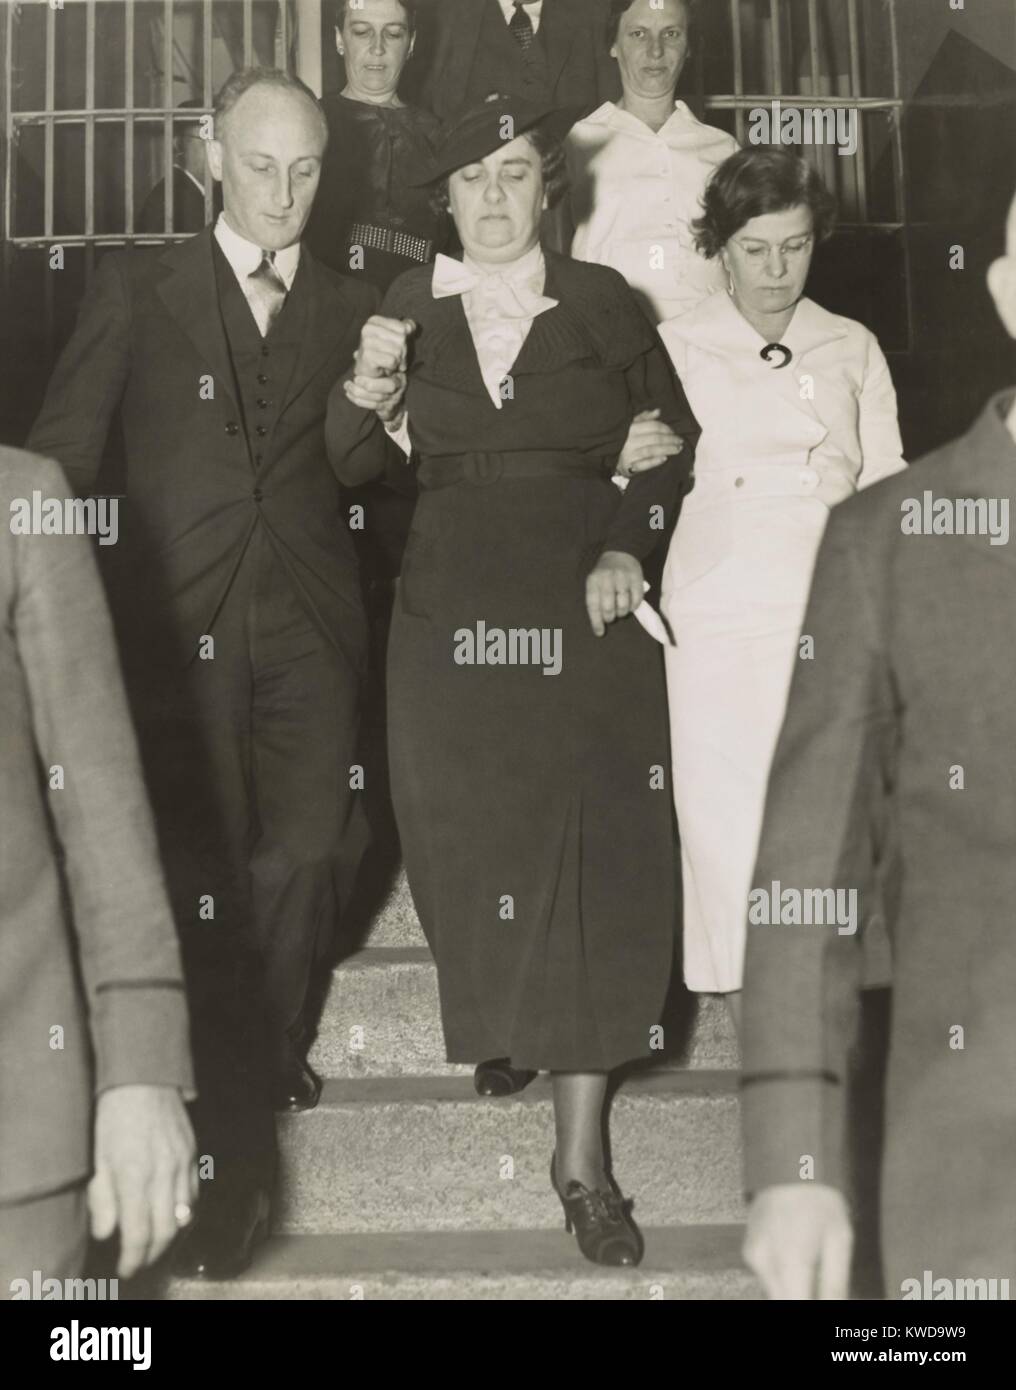 Mary Creighton (center), leaving Nassau County jail for Sing Sing Prison, Jan. 20, 1936. On July 16, 1936, she was executed, along with her accomplice, Everett Applegate, for the poison murder of Ada Applegate (BSLOC 2016 10 82) Stock Photo